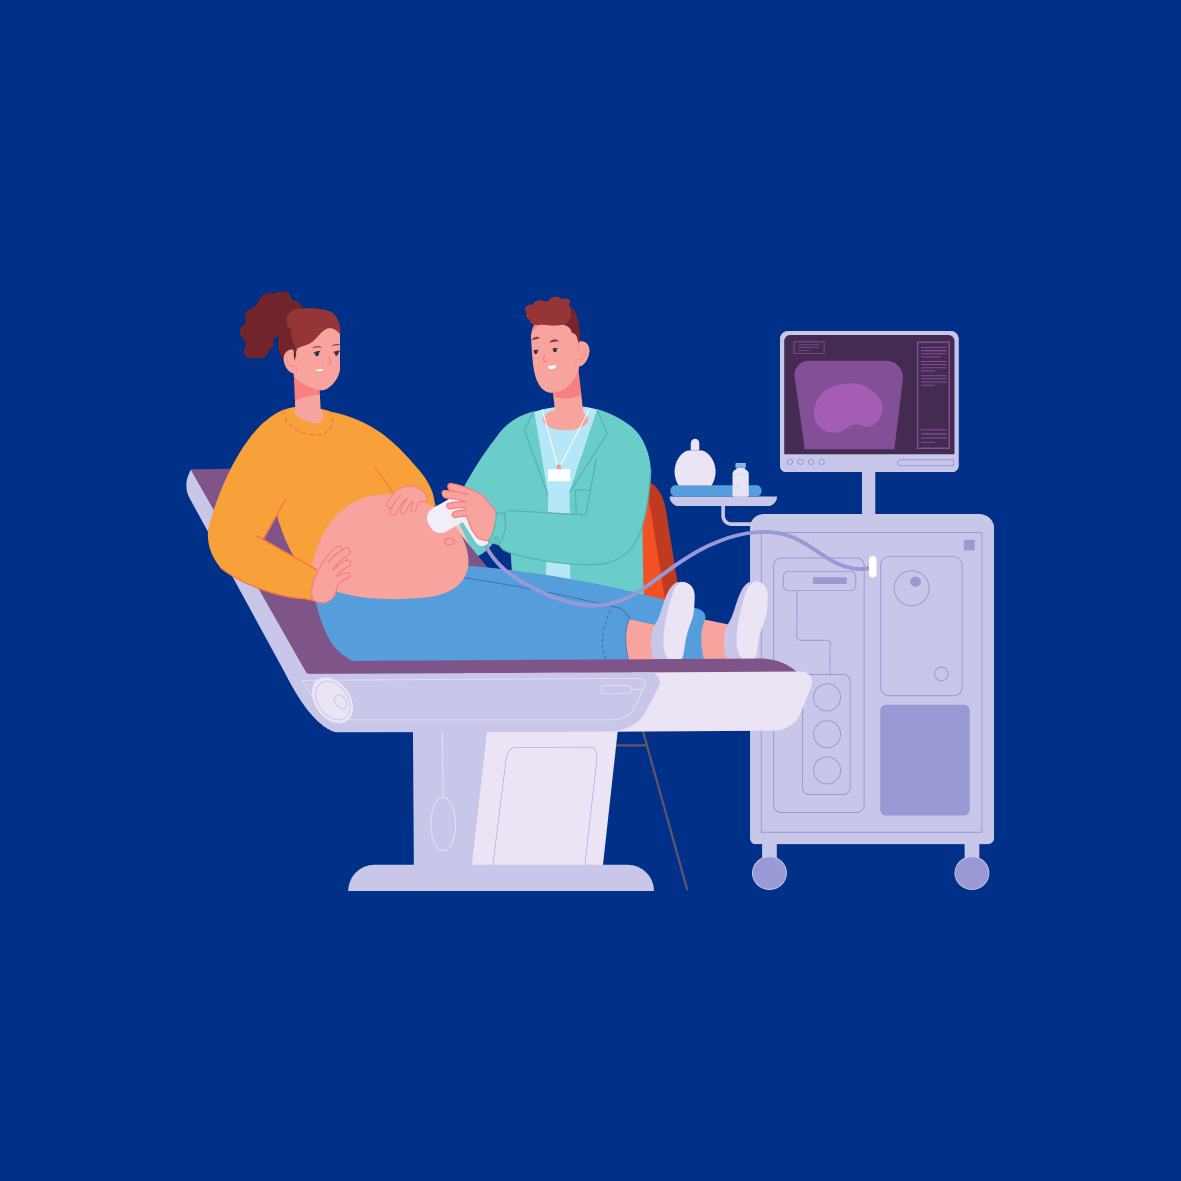 Image of pregnant lady getting an ultrasound scan